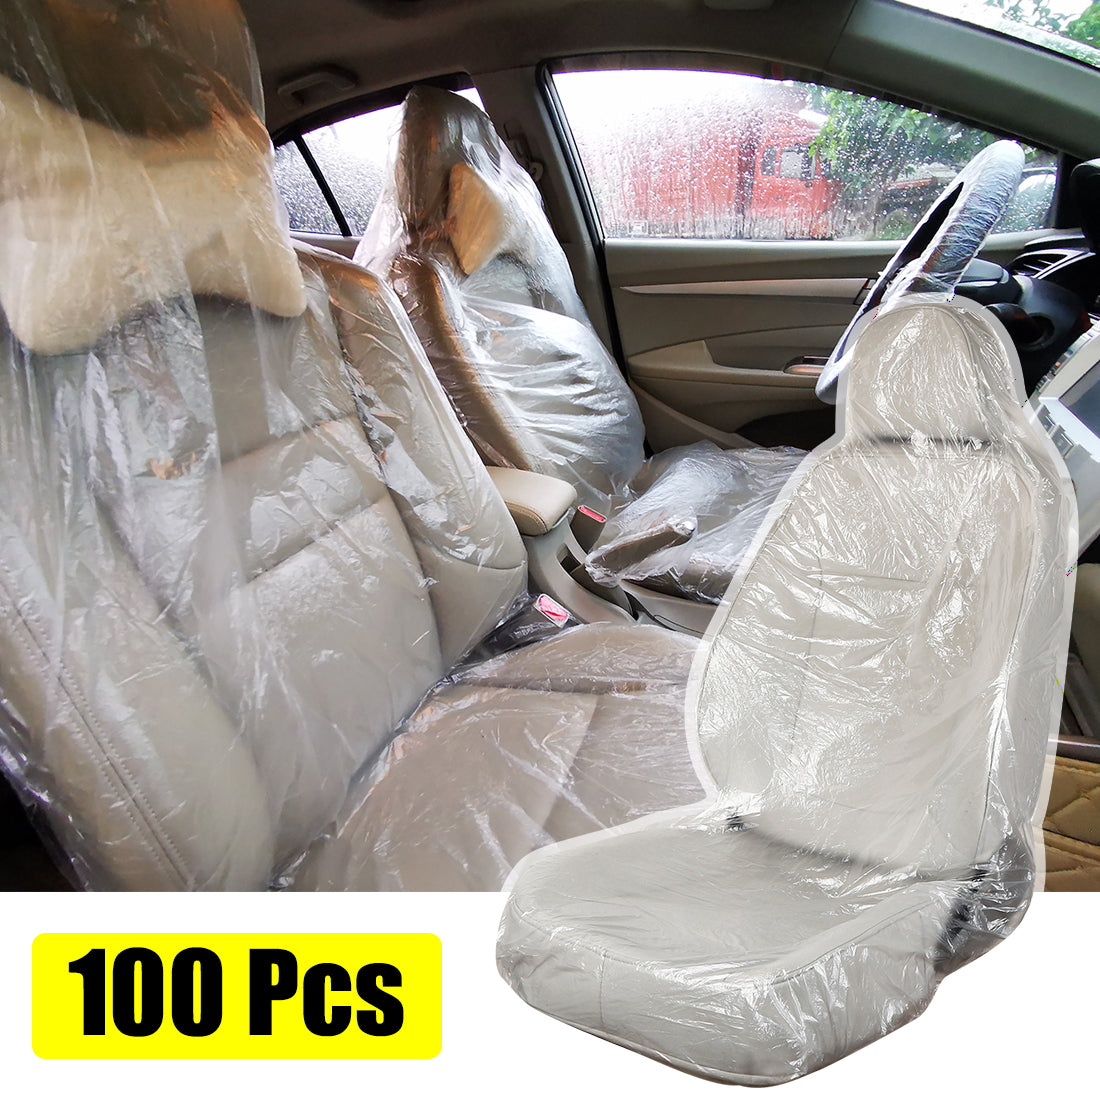 X AUTOHAUX 100 Pcs Waterproof Dustproof Seat Covers Universal for Car Truck Taxi SUV